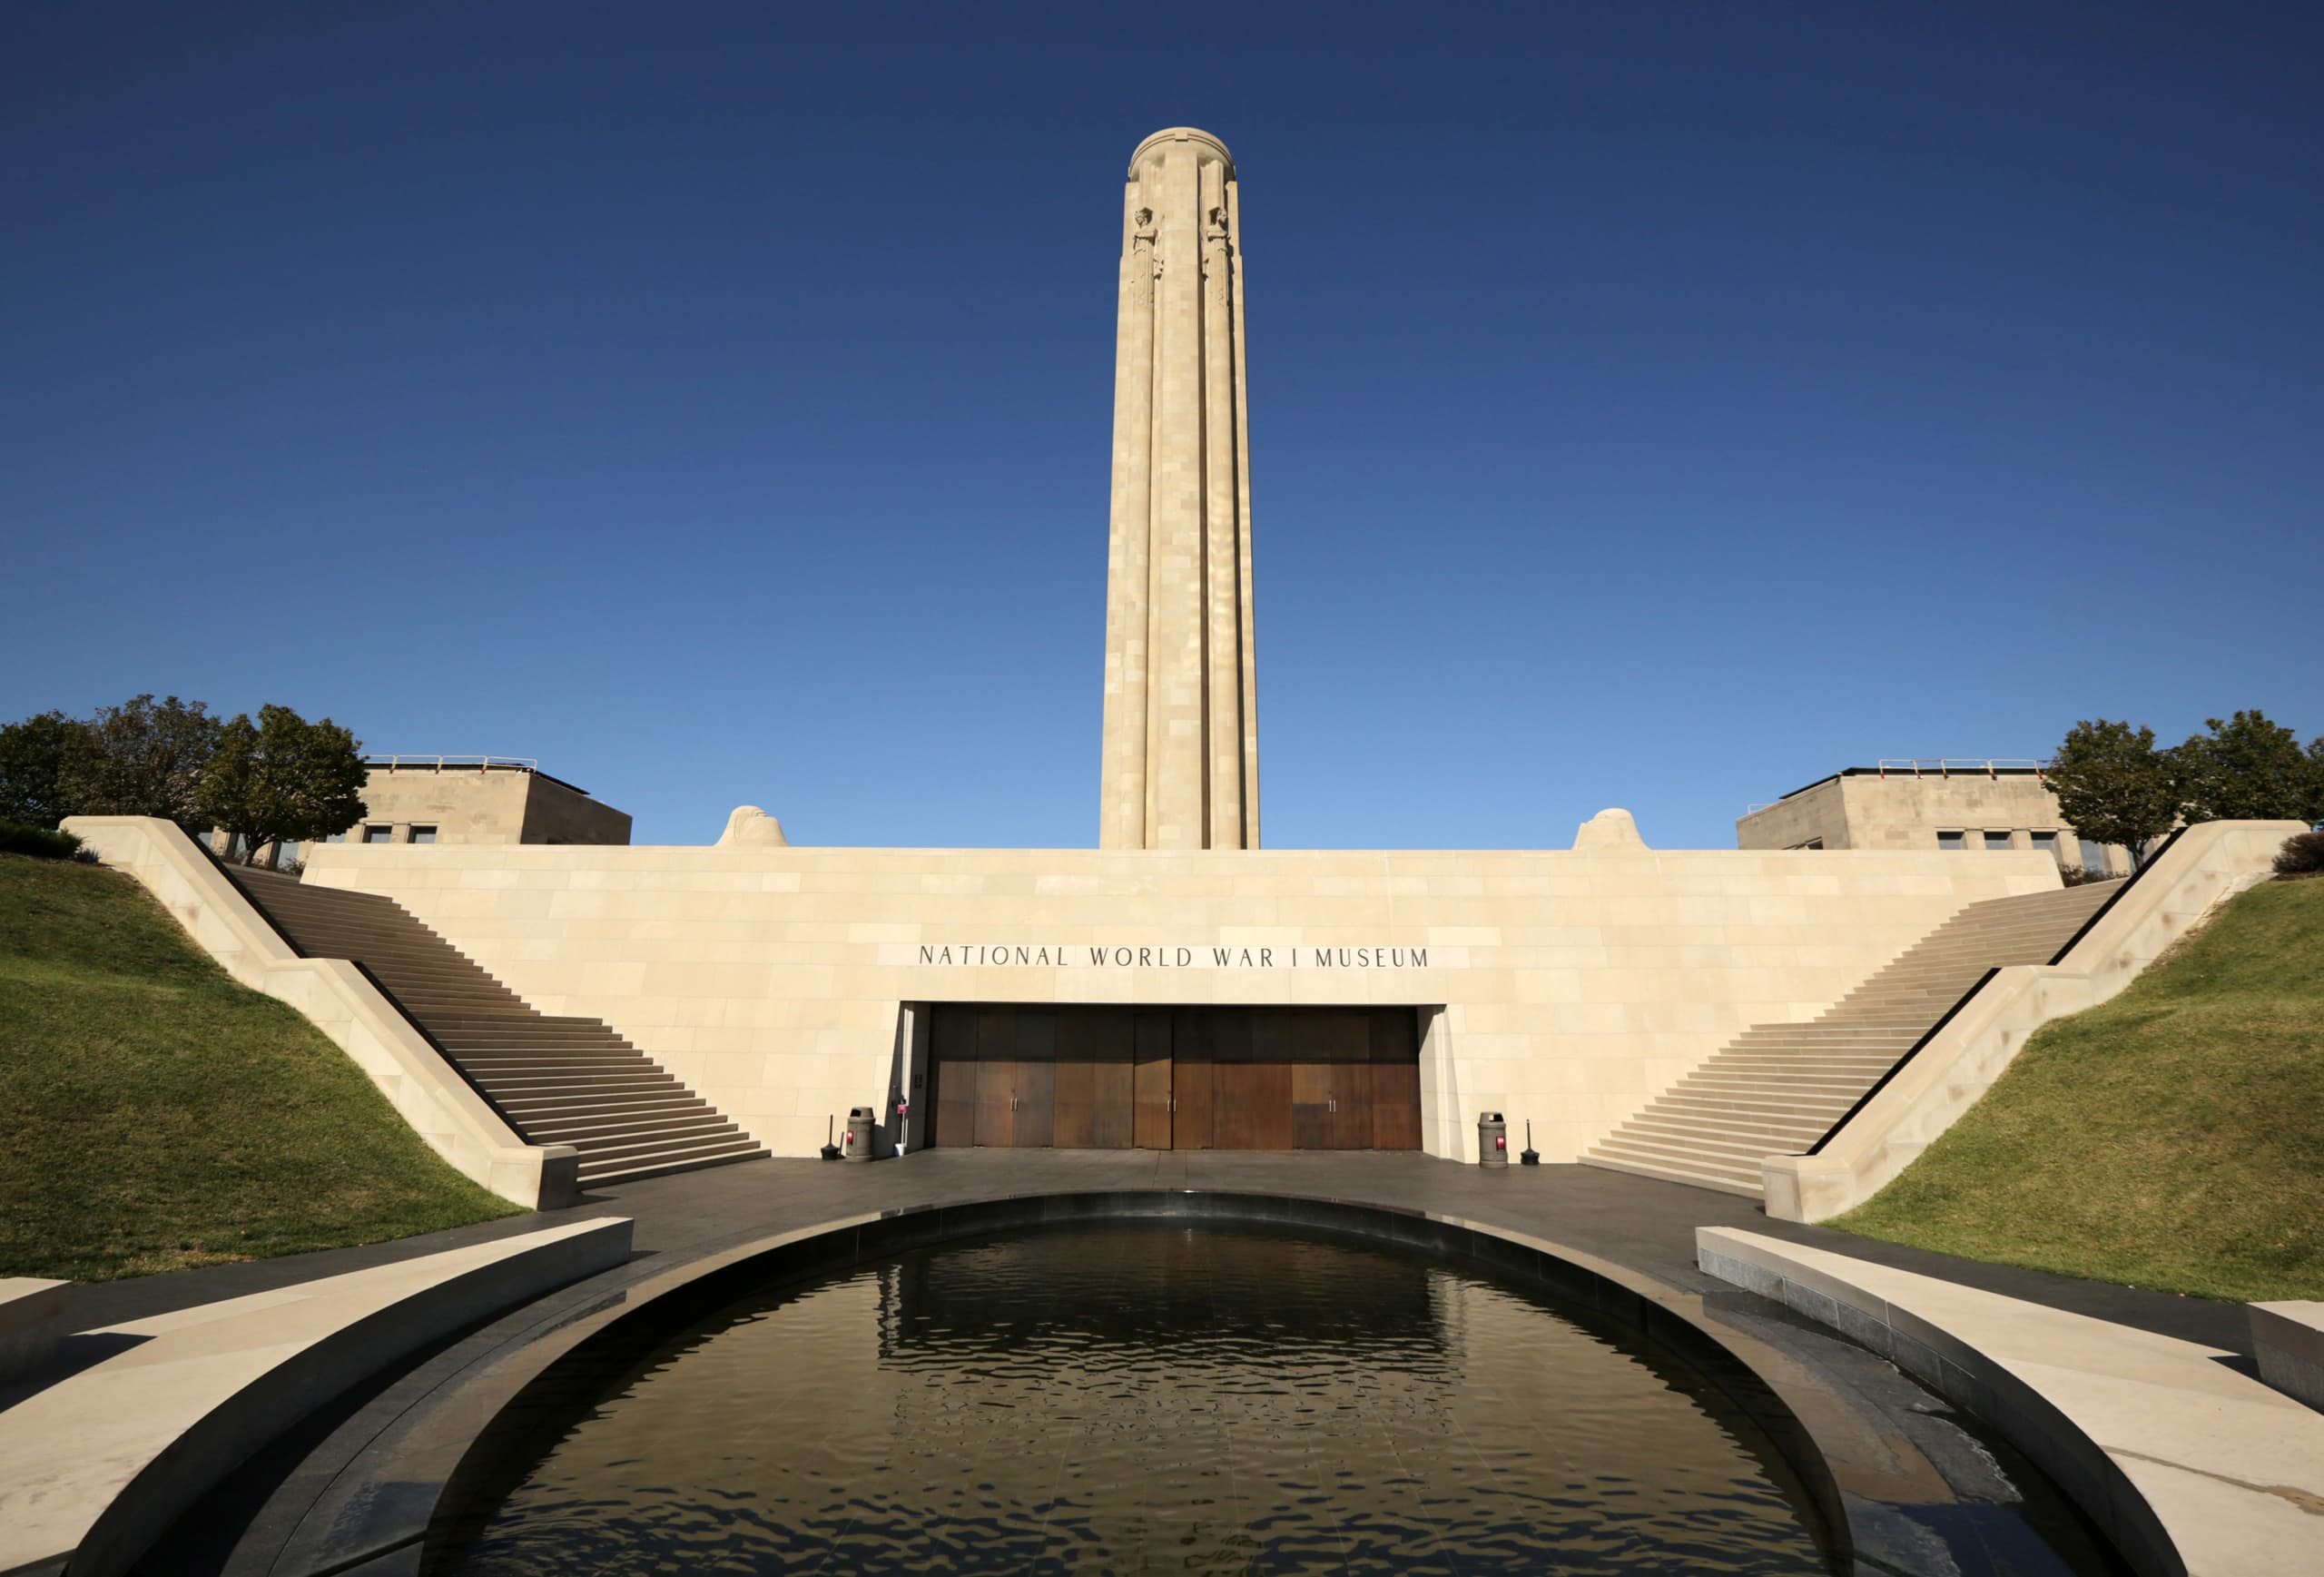 The National World War I museum has a variety of U.S. veteran memorials and monuments honoring the sacrifice of military personnel during WWI.